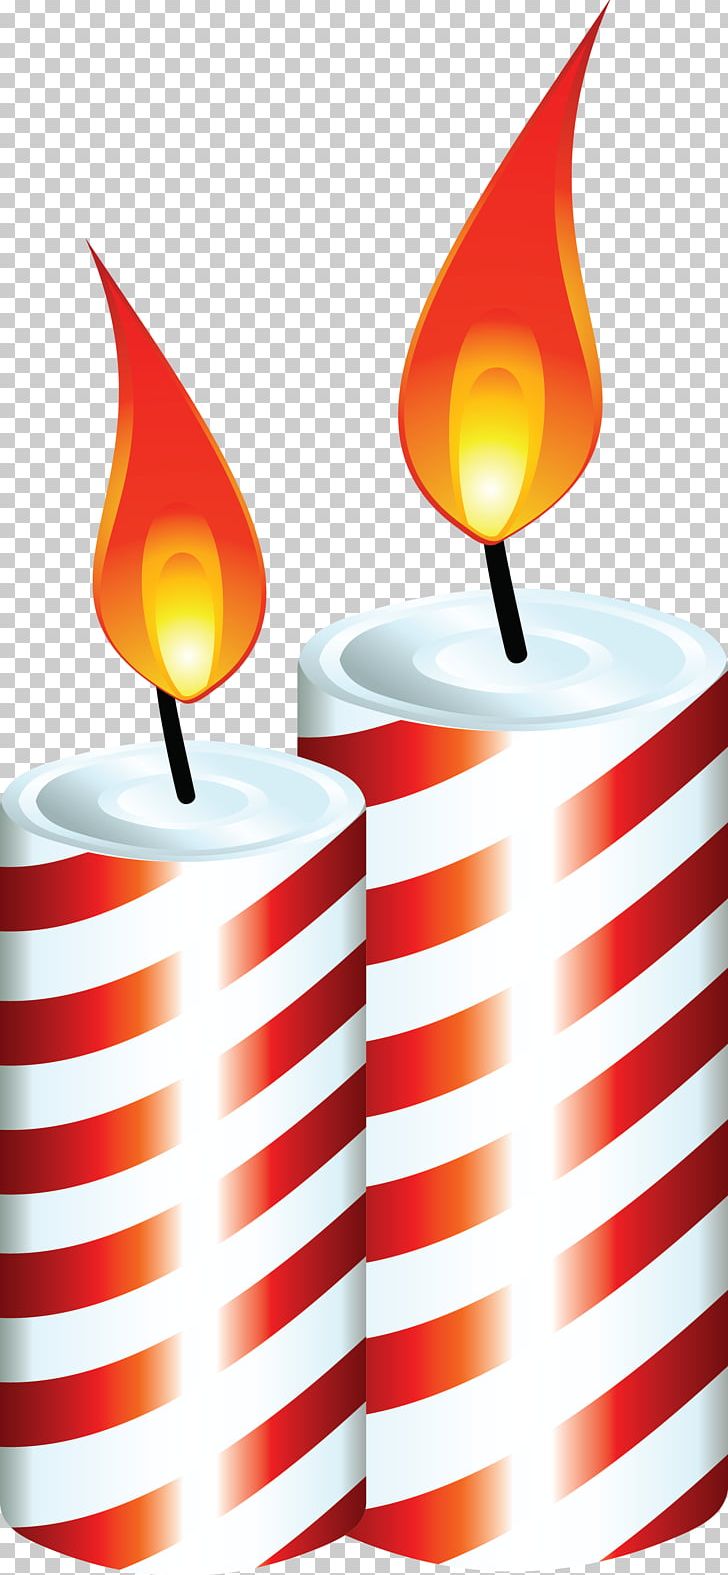 Santa Claus Christmas Candle PNG, Clipart, Candle, Candles, Candles Vector, Christmas, Christmas Border Free PNG Download